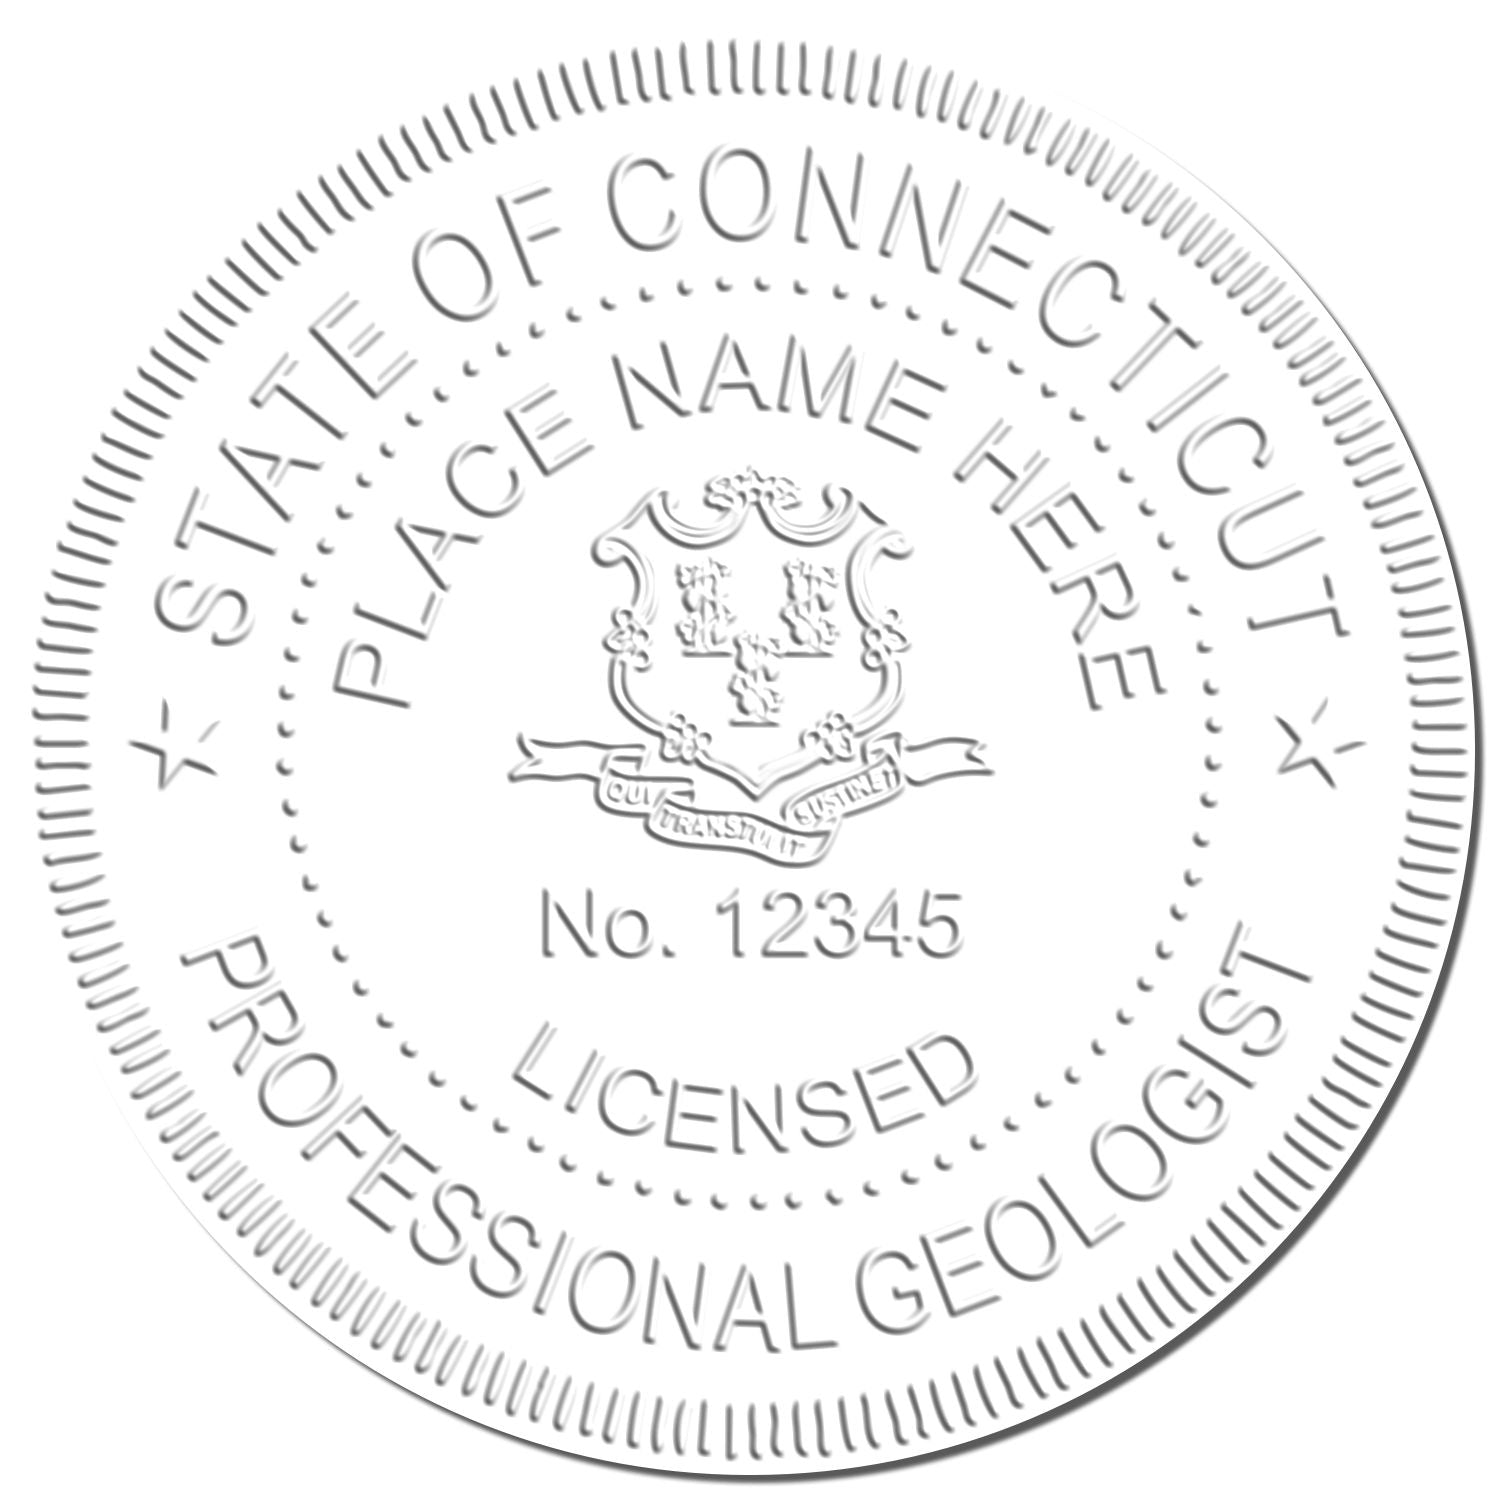 The main image for the Connecticut Geologist Desk Seal depicting a sample of the imprint and imprint sample